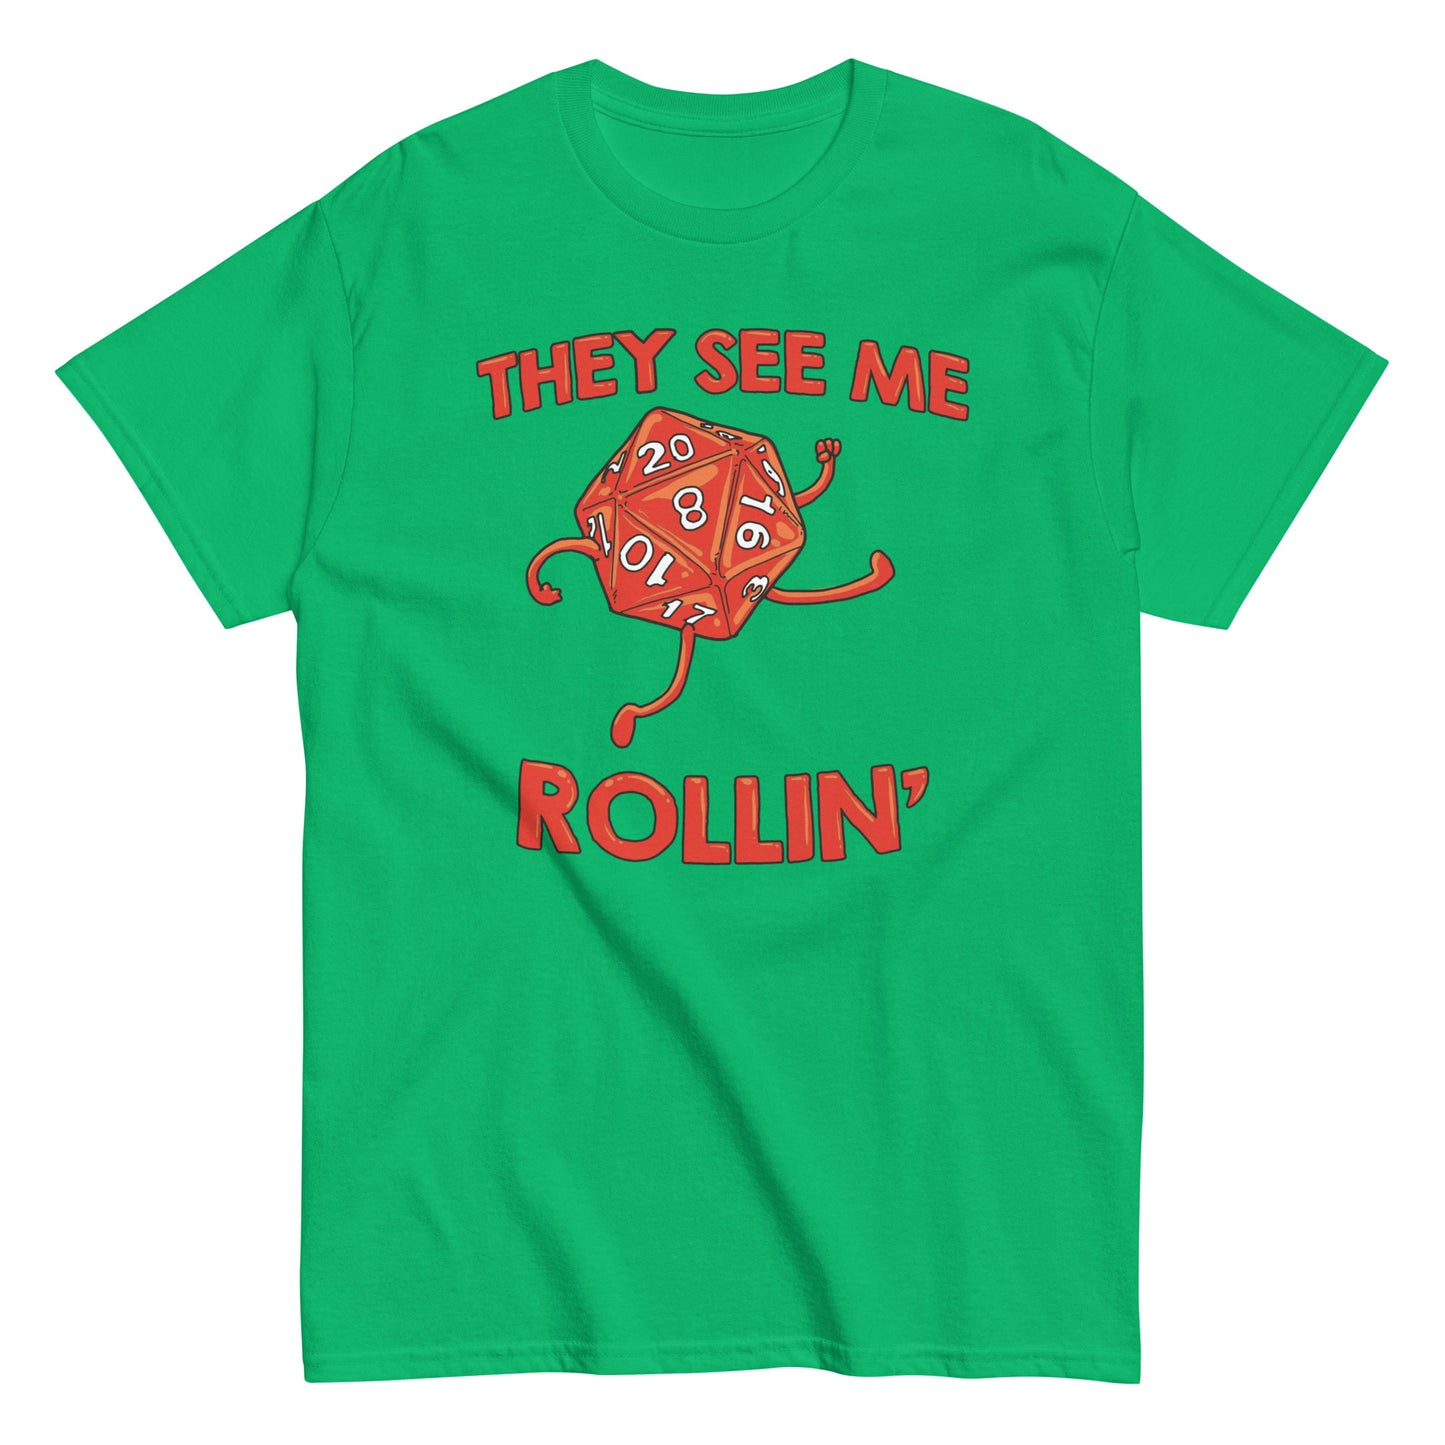 They See Me Rollin' Men's Classic Tee